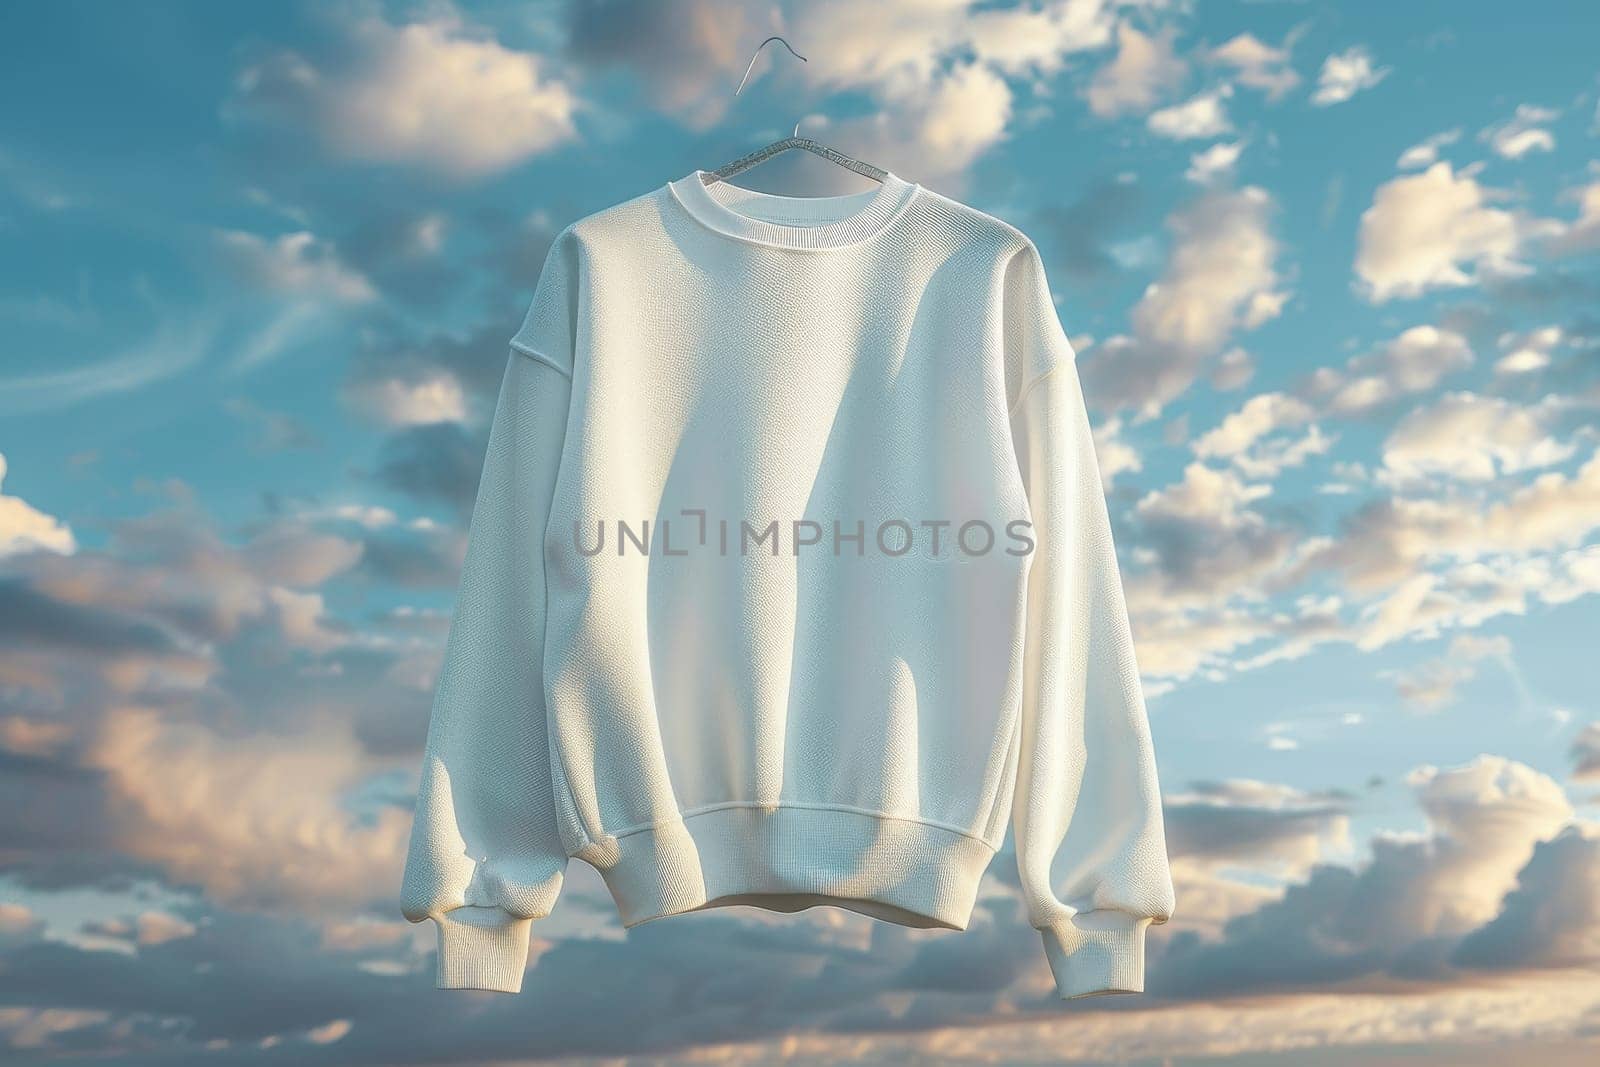 A white sweater with a leopard print design is displayed in a blue sky by itchaznong